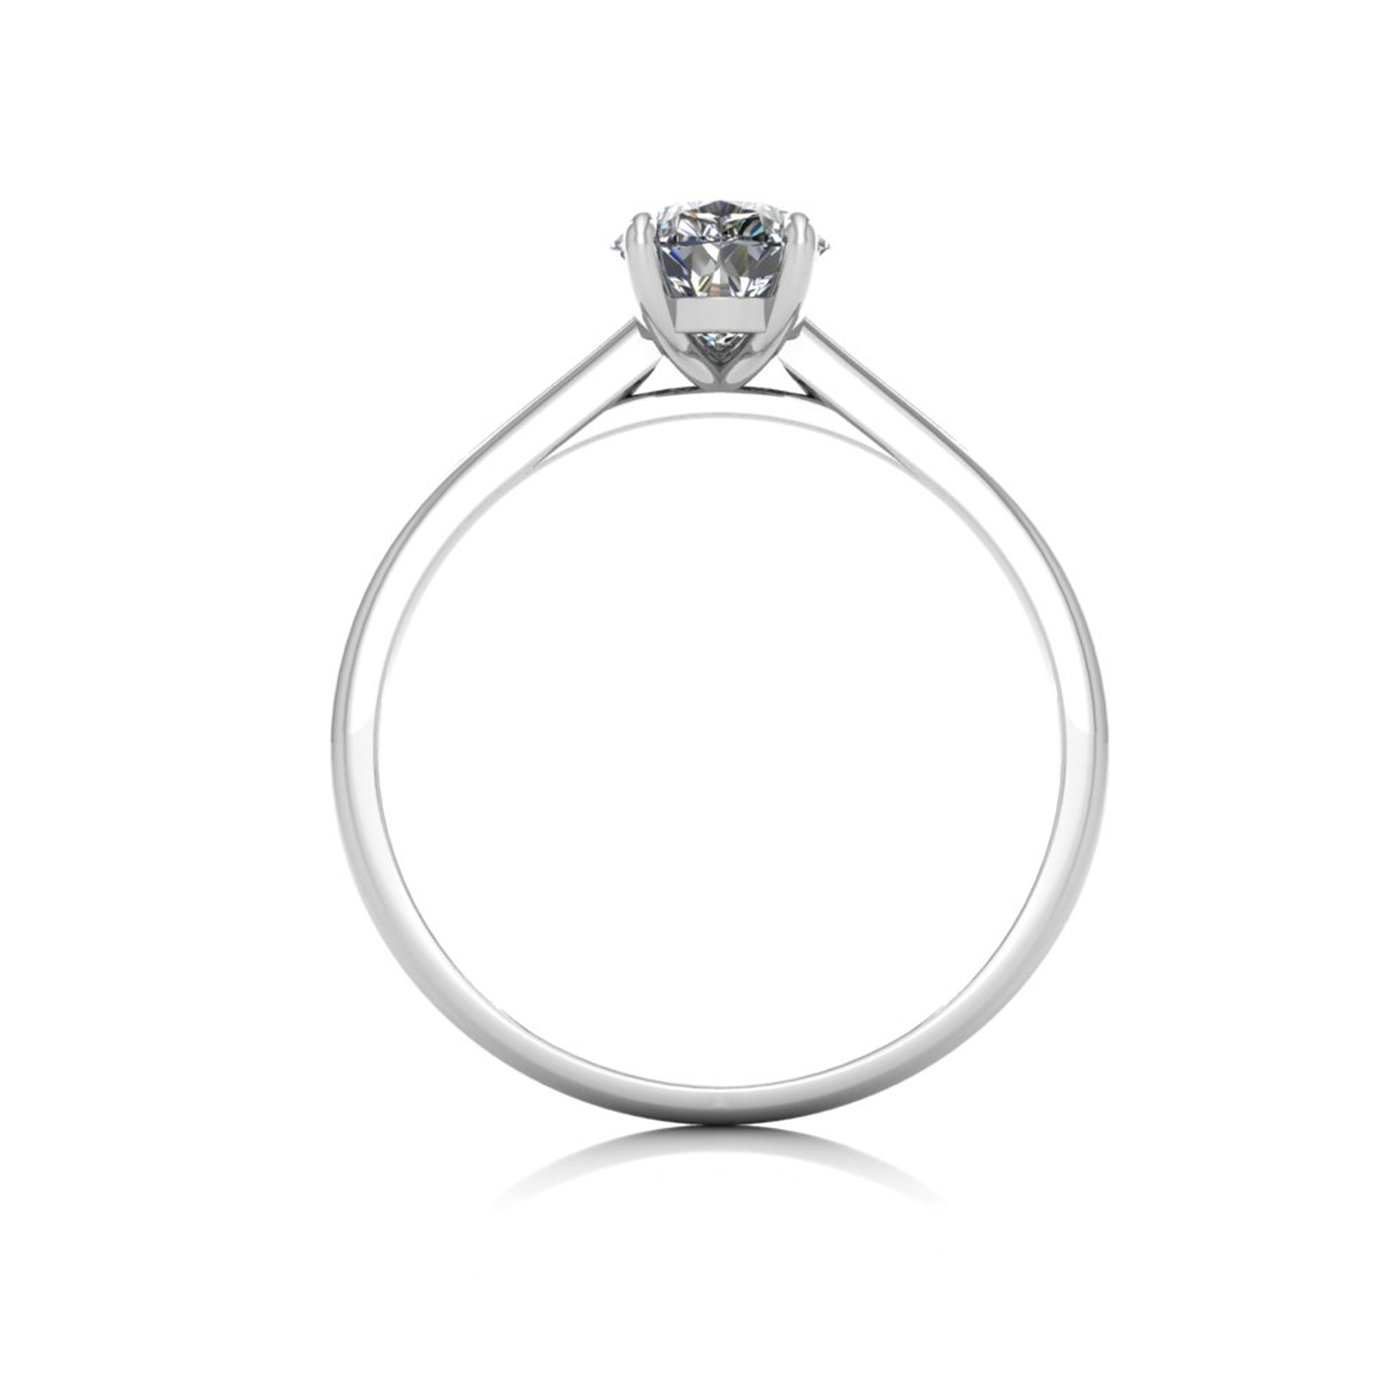 18k white gold  1,00 ct 3 prongs solitaire pear cut diamond engagement ring with whisper thin band